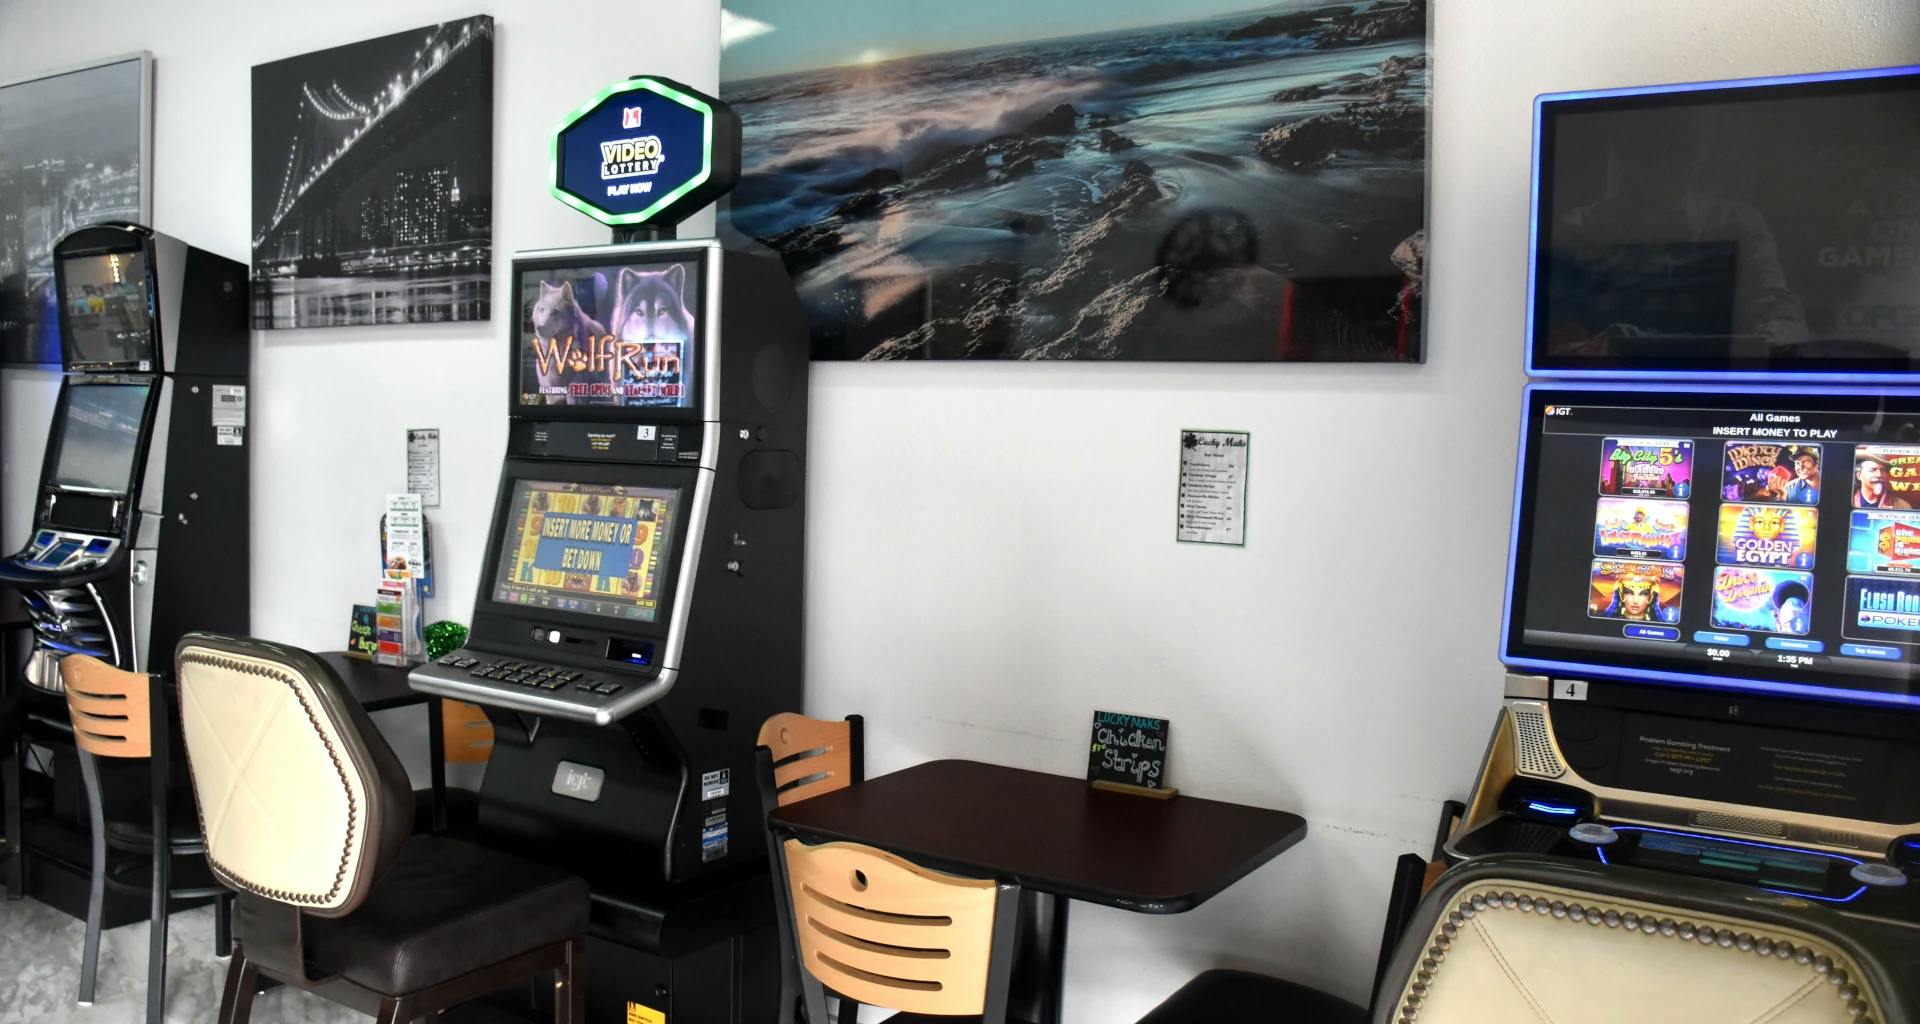 Backdrop image of video pocker slot machines and fully stocked bar